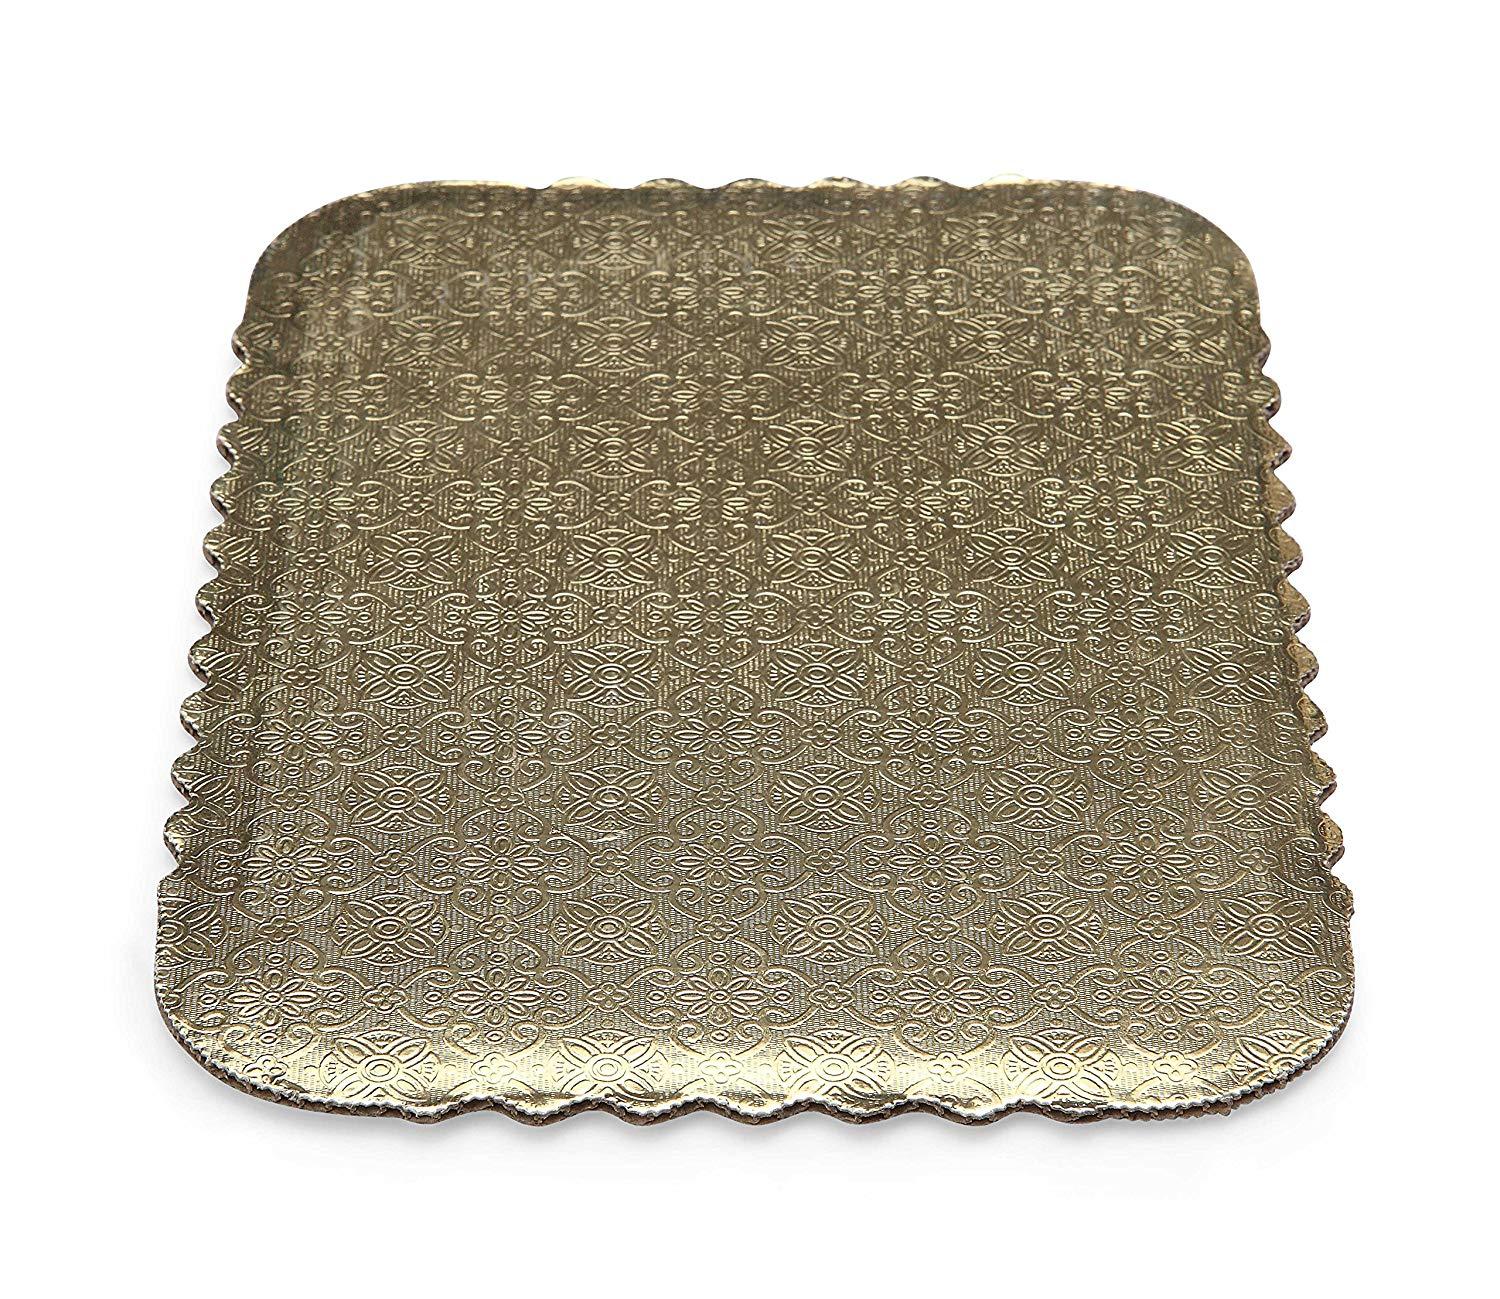 Gold Scalloped Sheet Cake Boards — All Sizes Whalen Packaging Cake Board - Bake Supply Plus